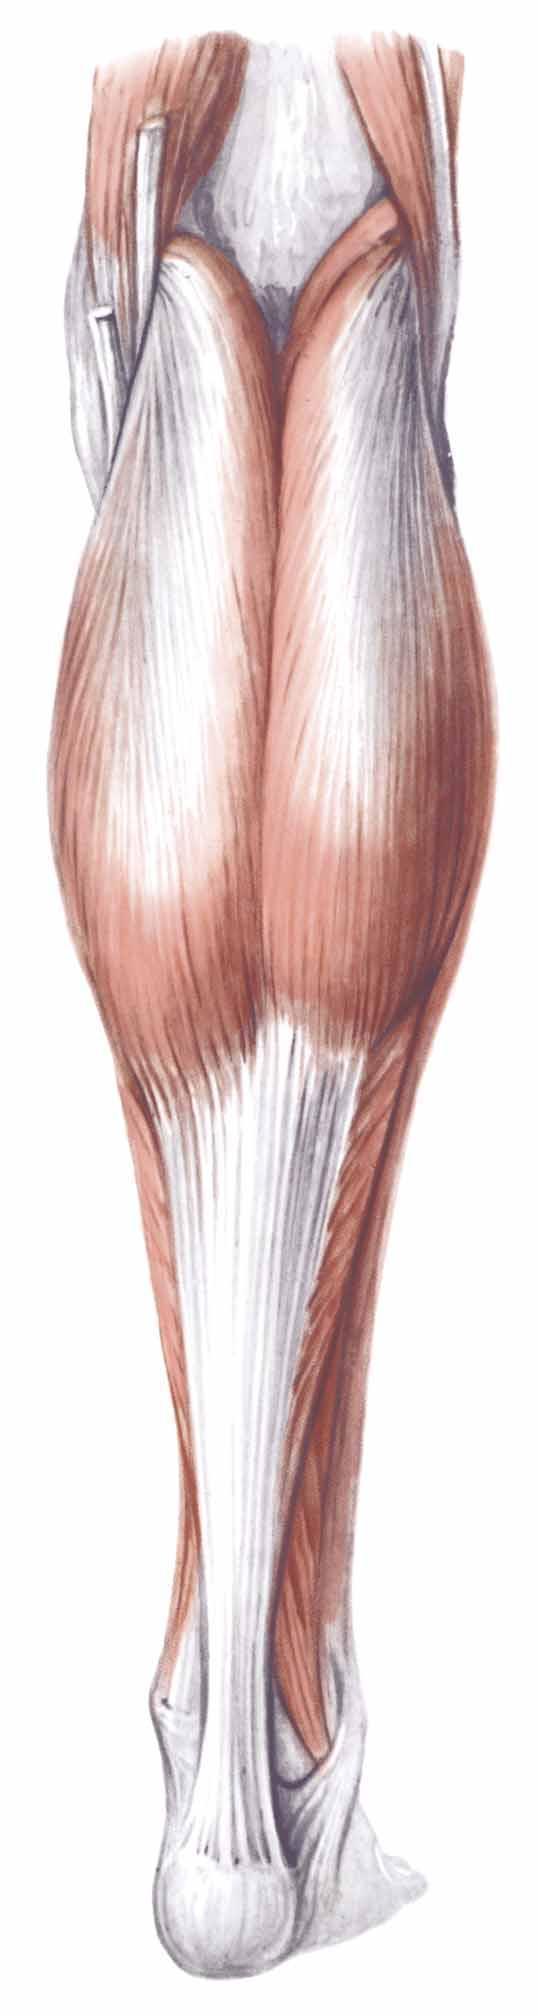 Two main muscles in the calf Gastrocnemius - most superficial and most prominent - has two proximal heads - Origin: posterior femur - Insertion: calcaneus (via achilles